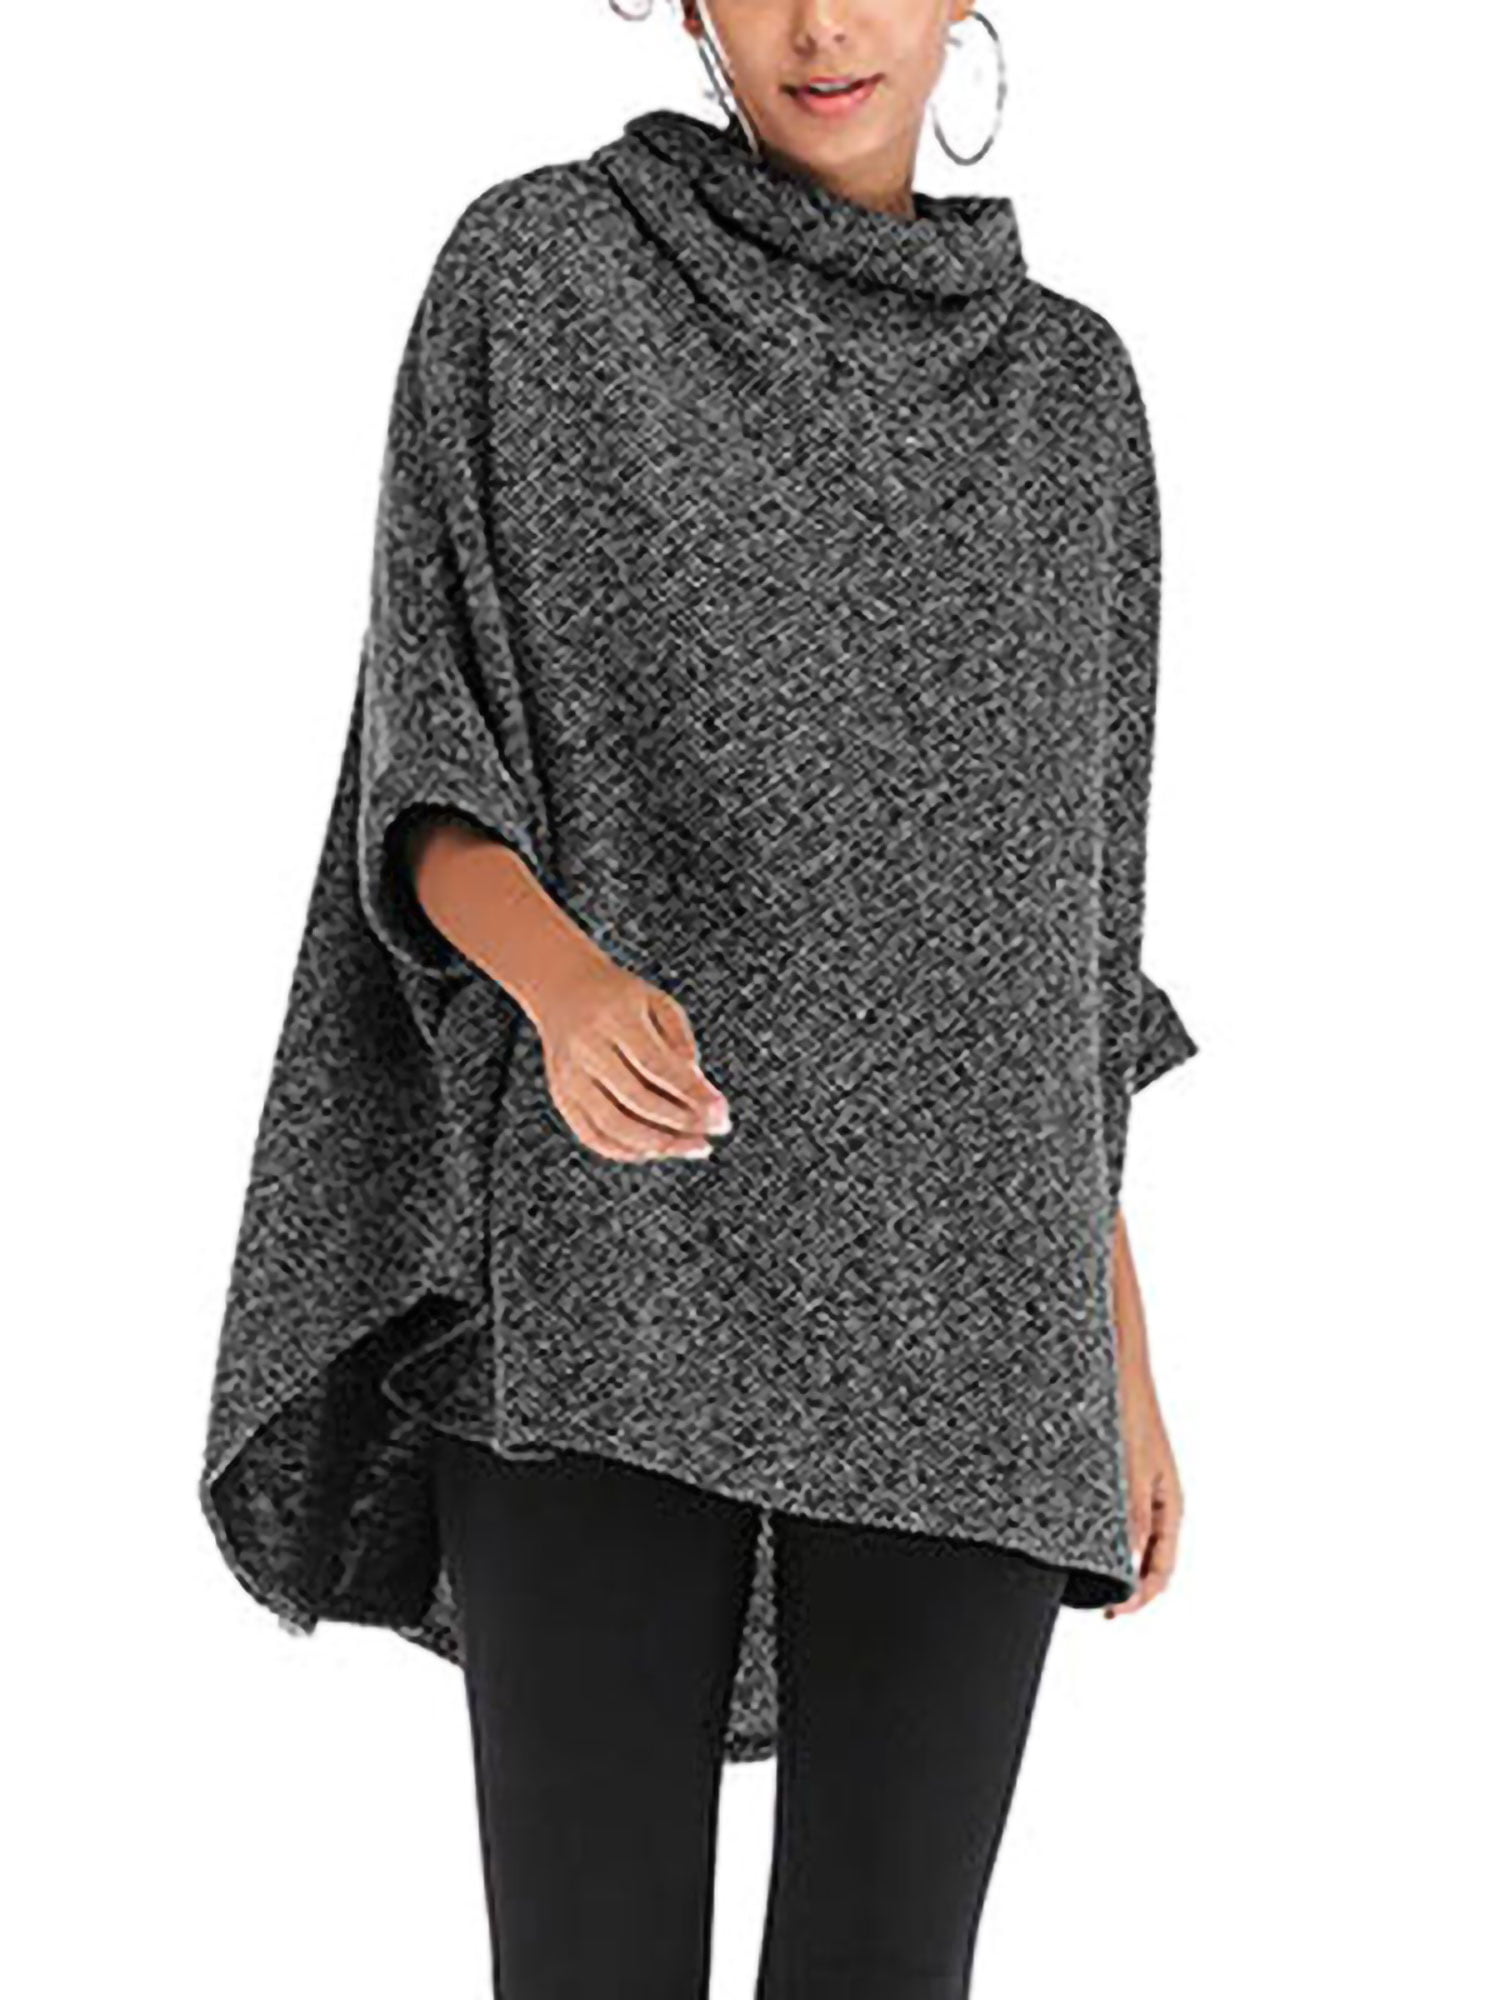 Avamo Womens Side Split Poncho Boho Casual Loose Turtleneck Knit Pullover  Sweater Jumper Tops Winter Fall Batwing Sleeve Scarf